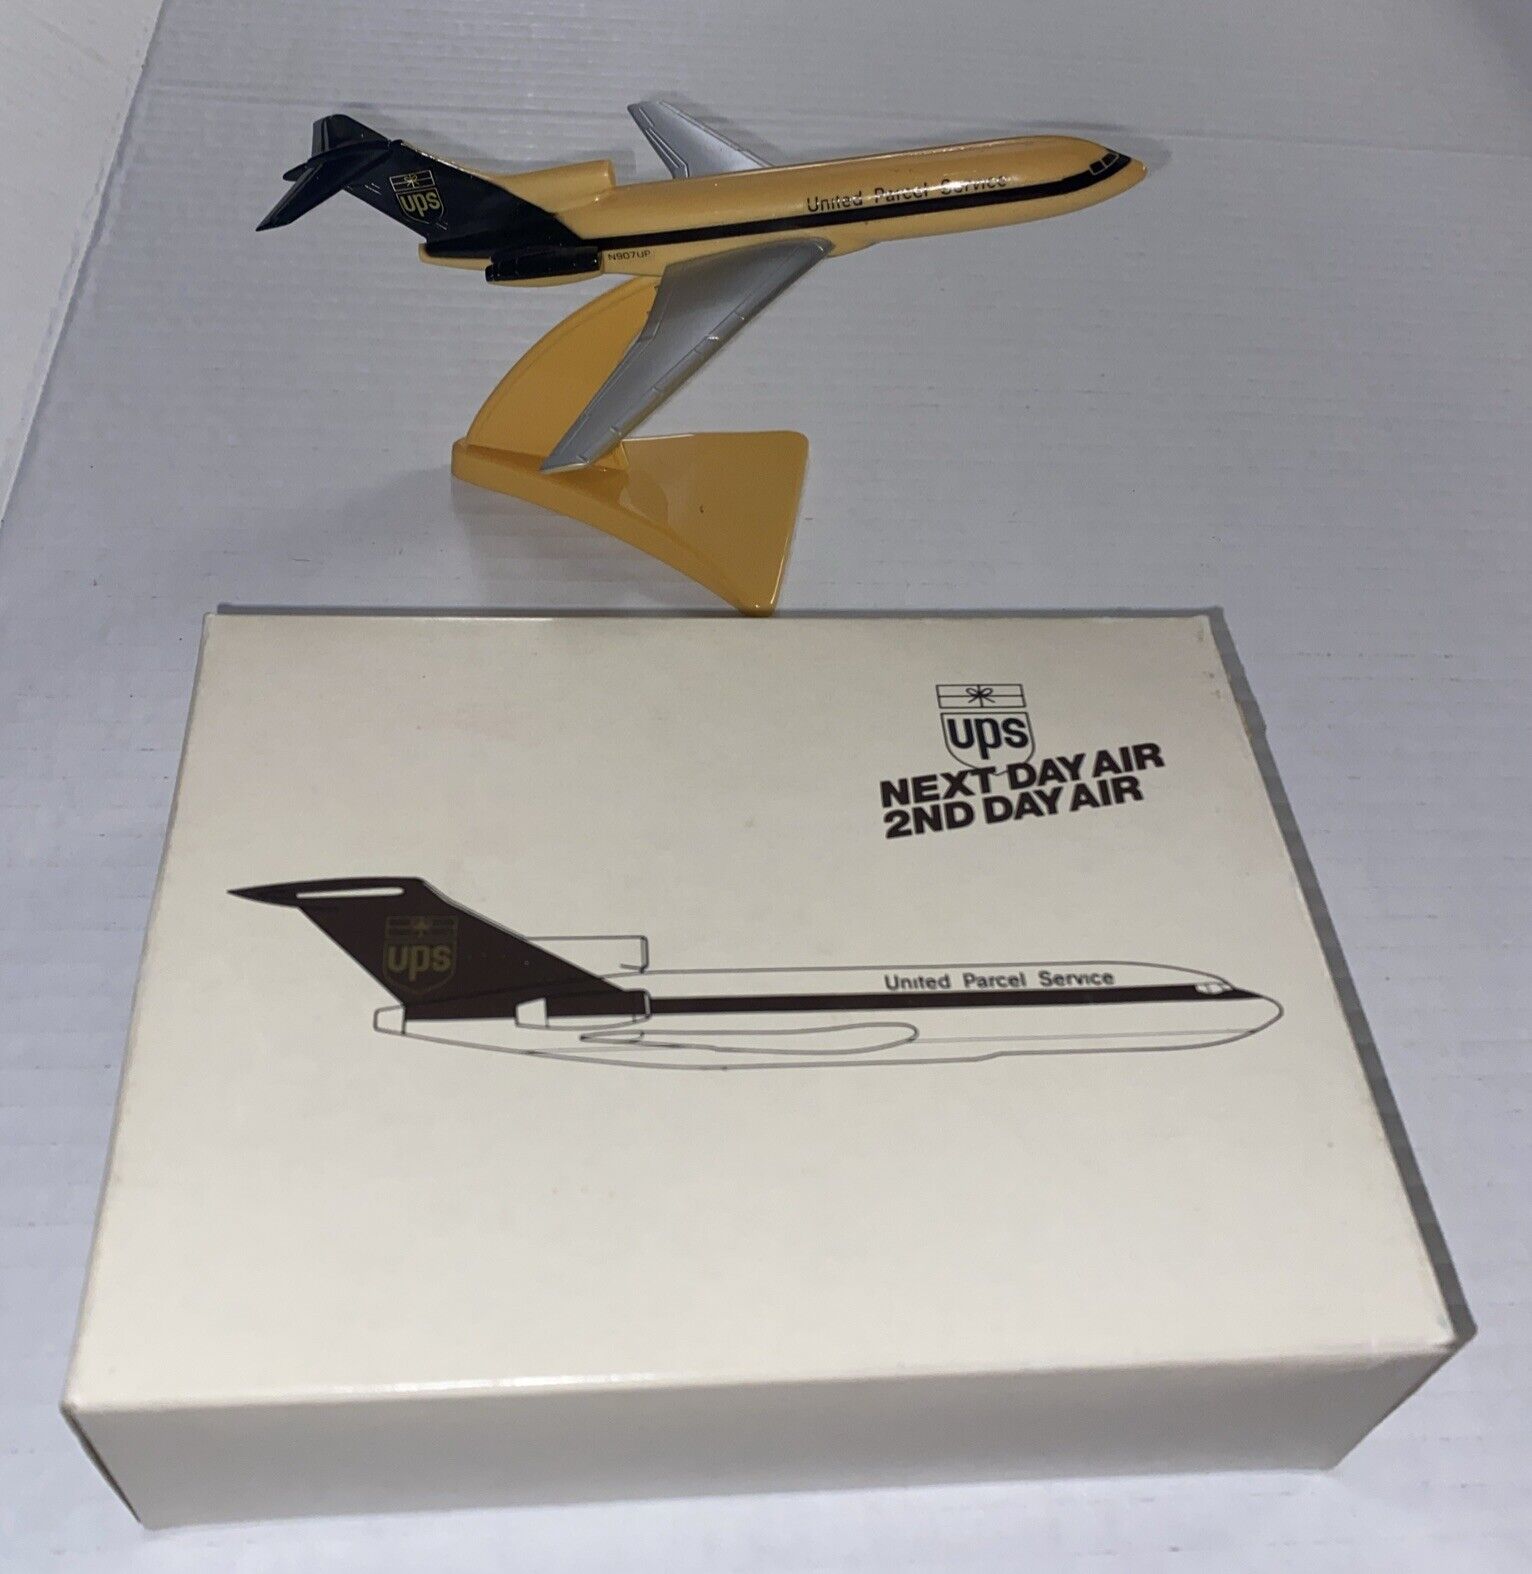 UPS United Parcel Service B727-100 Plastic Plane Model In Box N907UP w Stand